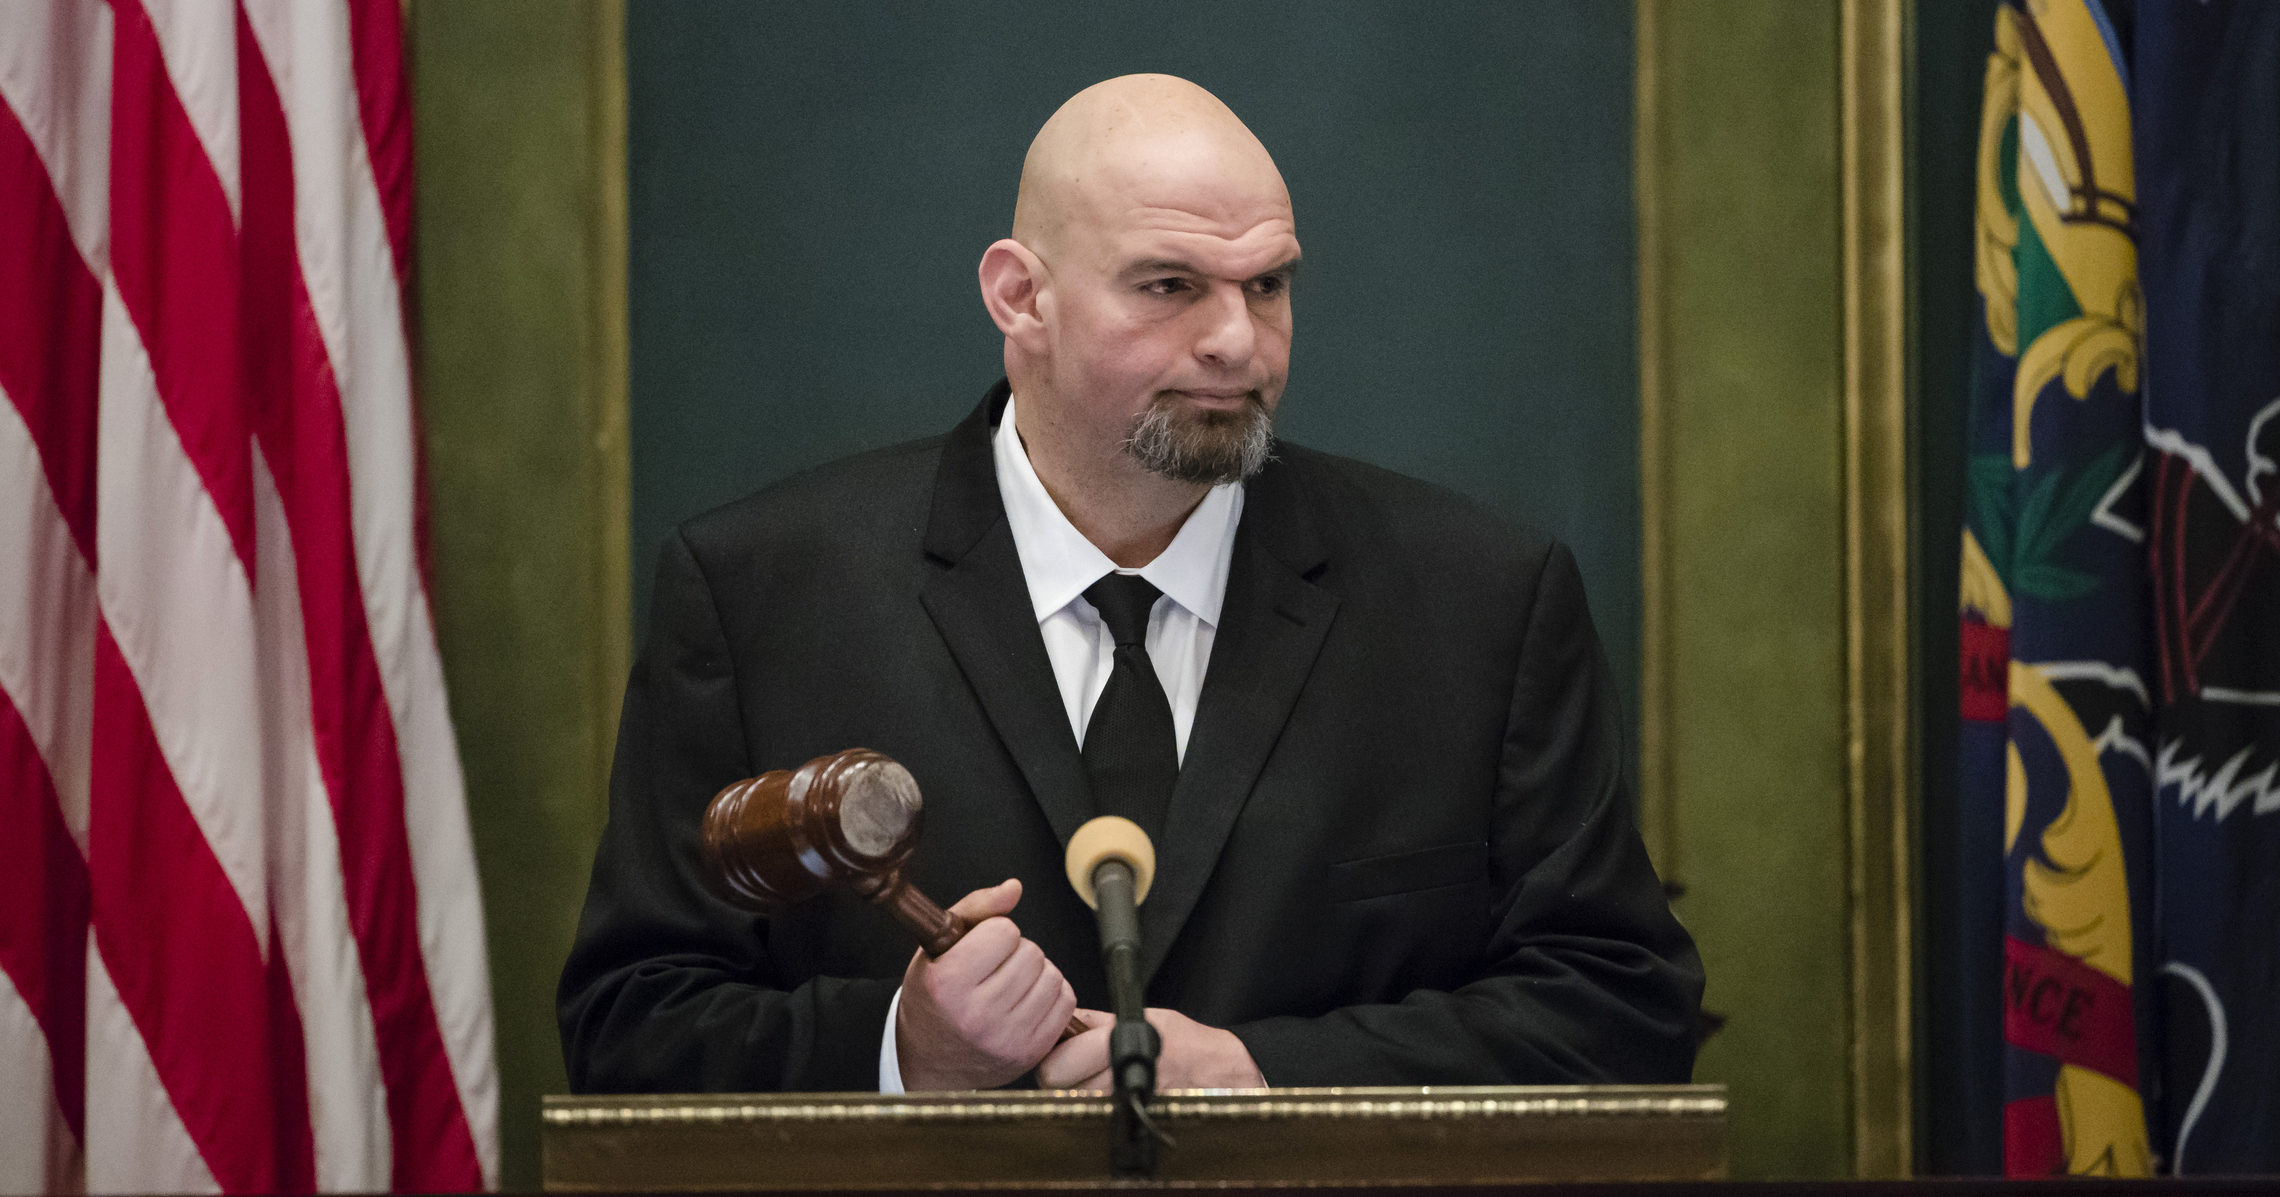 Pennsylvania Lt. Gov. John Fetterman holds a gavel after he was sworn into office at the state Capitol in Harrisburg on Jan. 15, 2019.